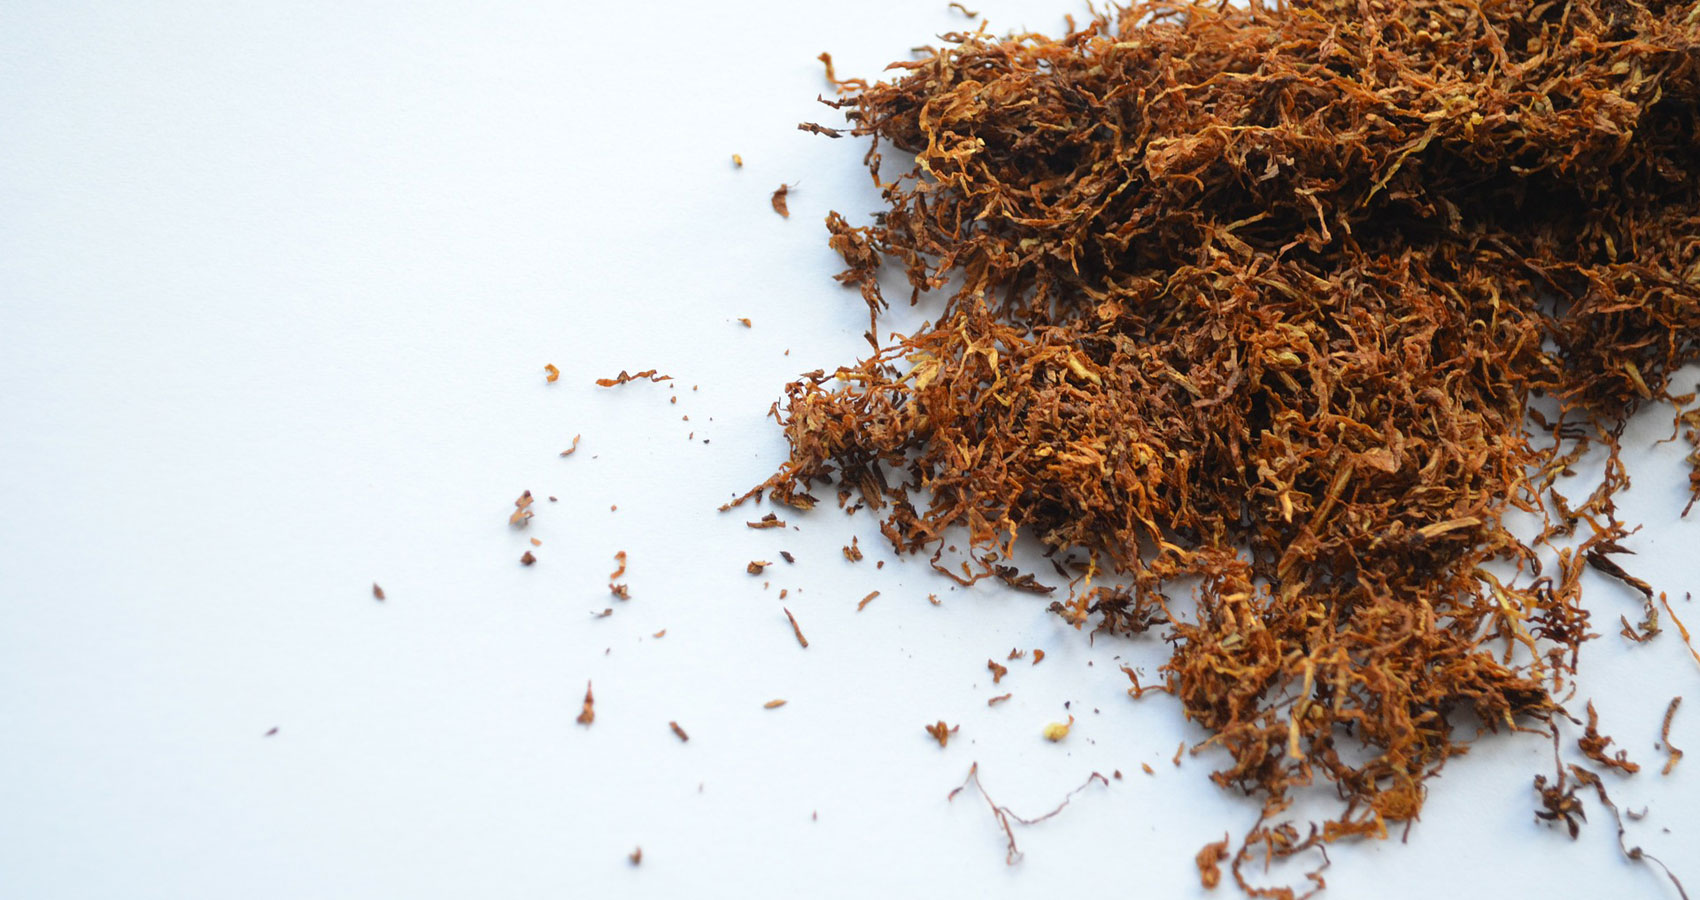 A Chew of Tobacco, a short story by Paul Thwaites at Spillwords.com